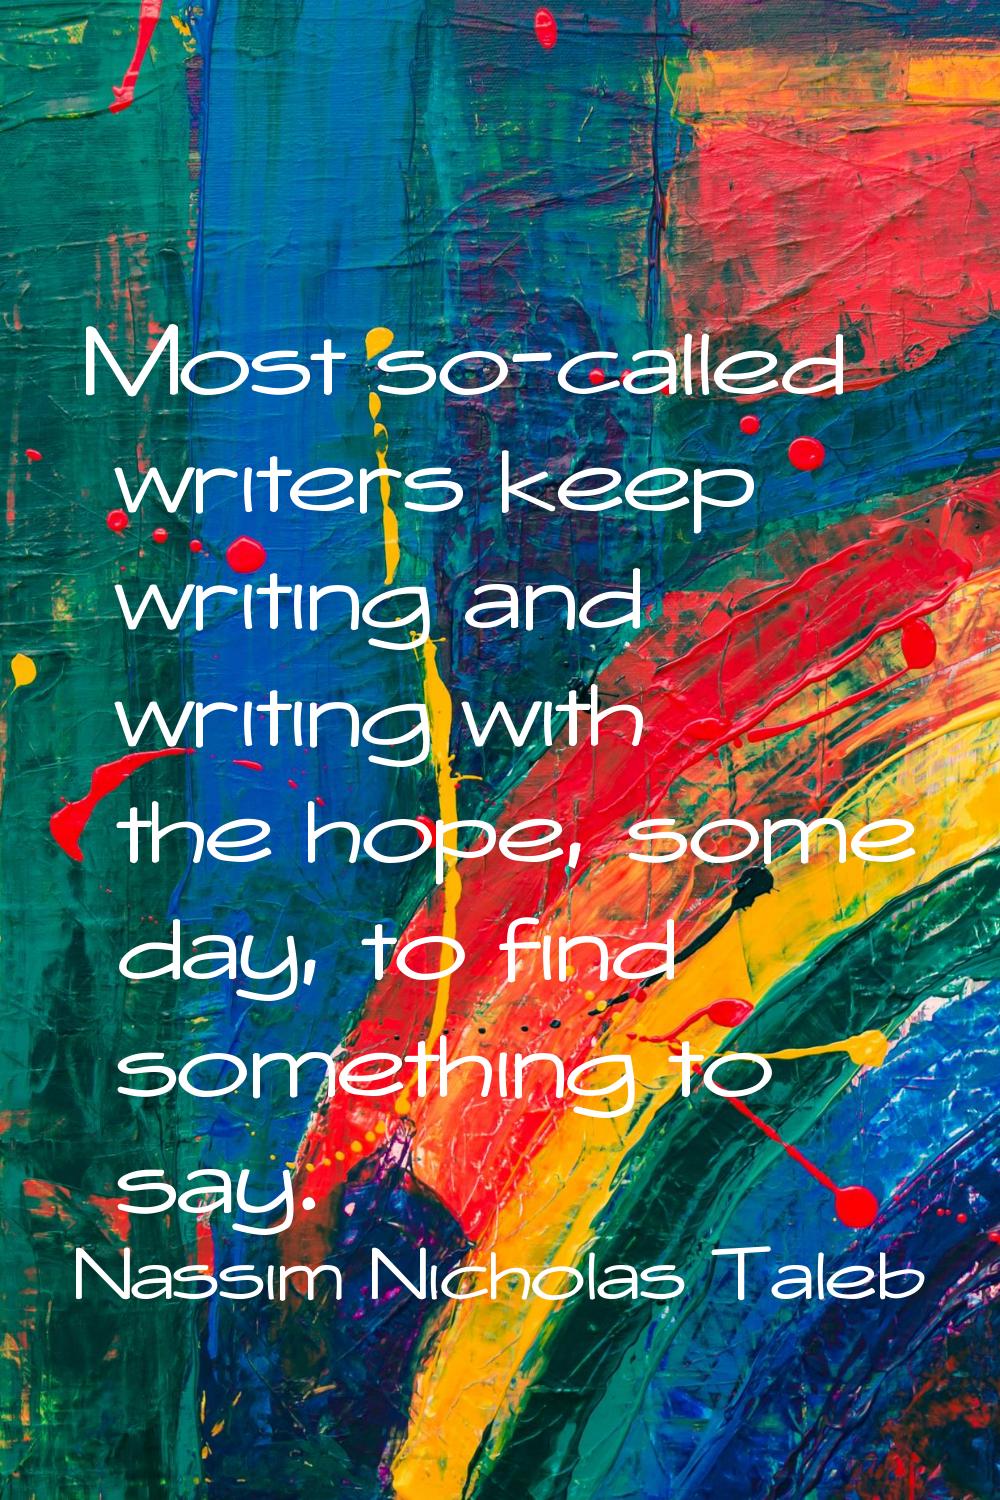 Most so-called writers keep writing and writing with the hope, some day, to find something to say.